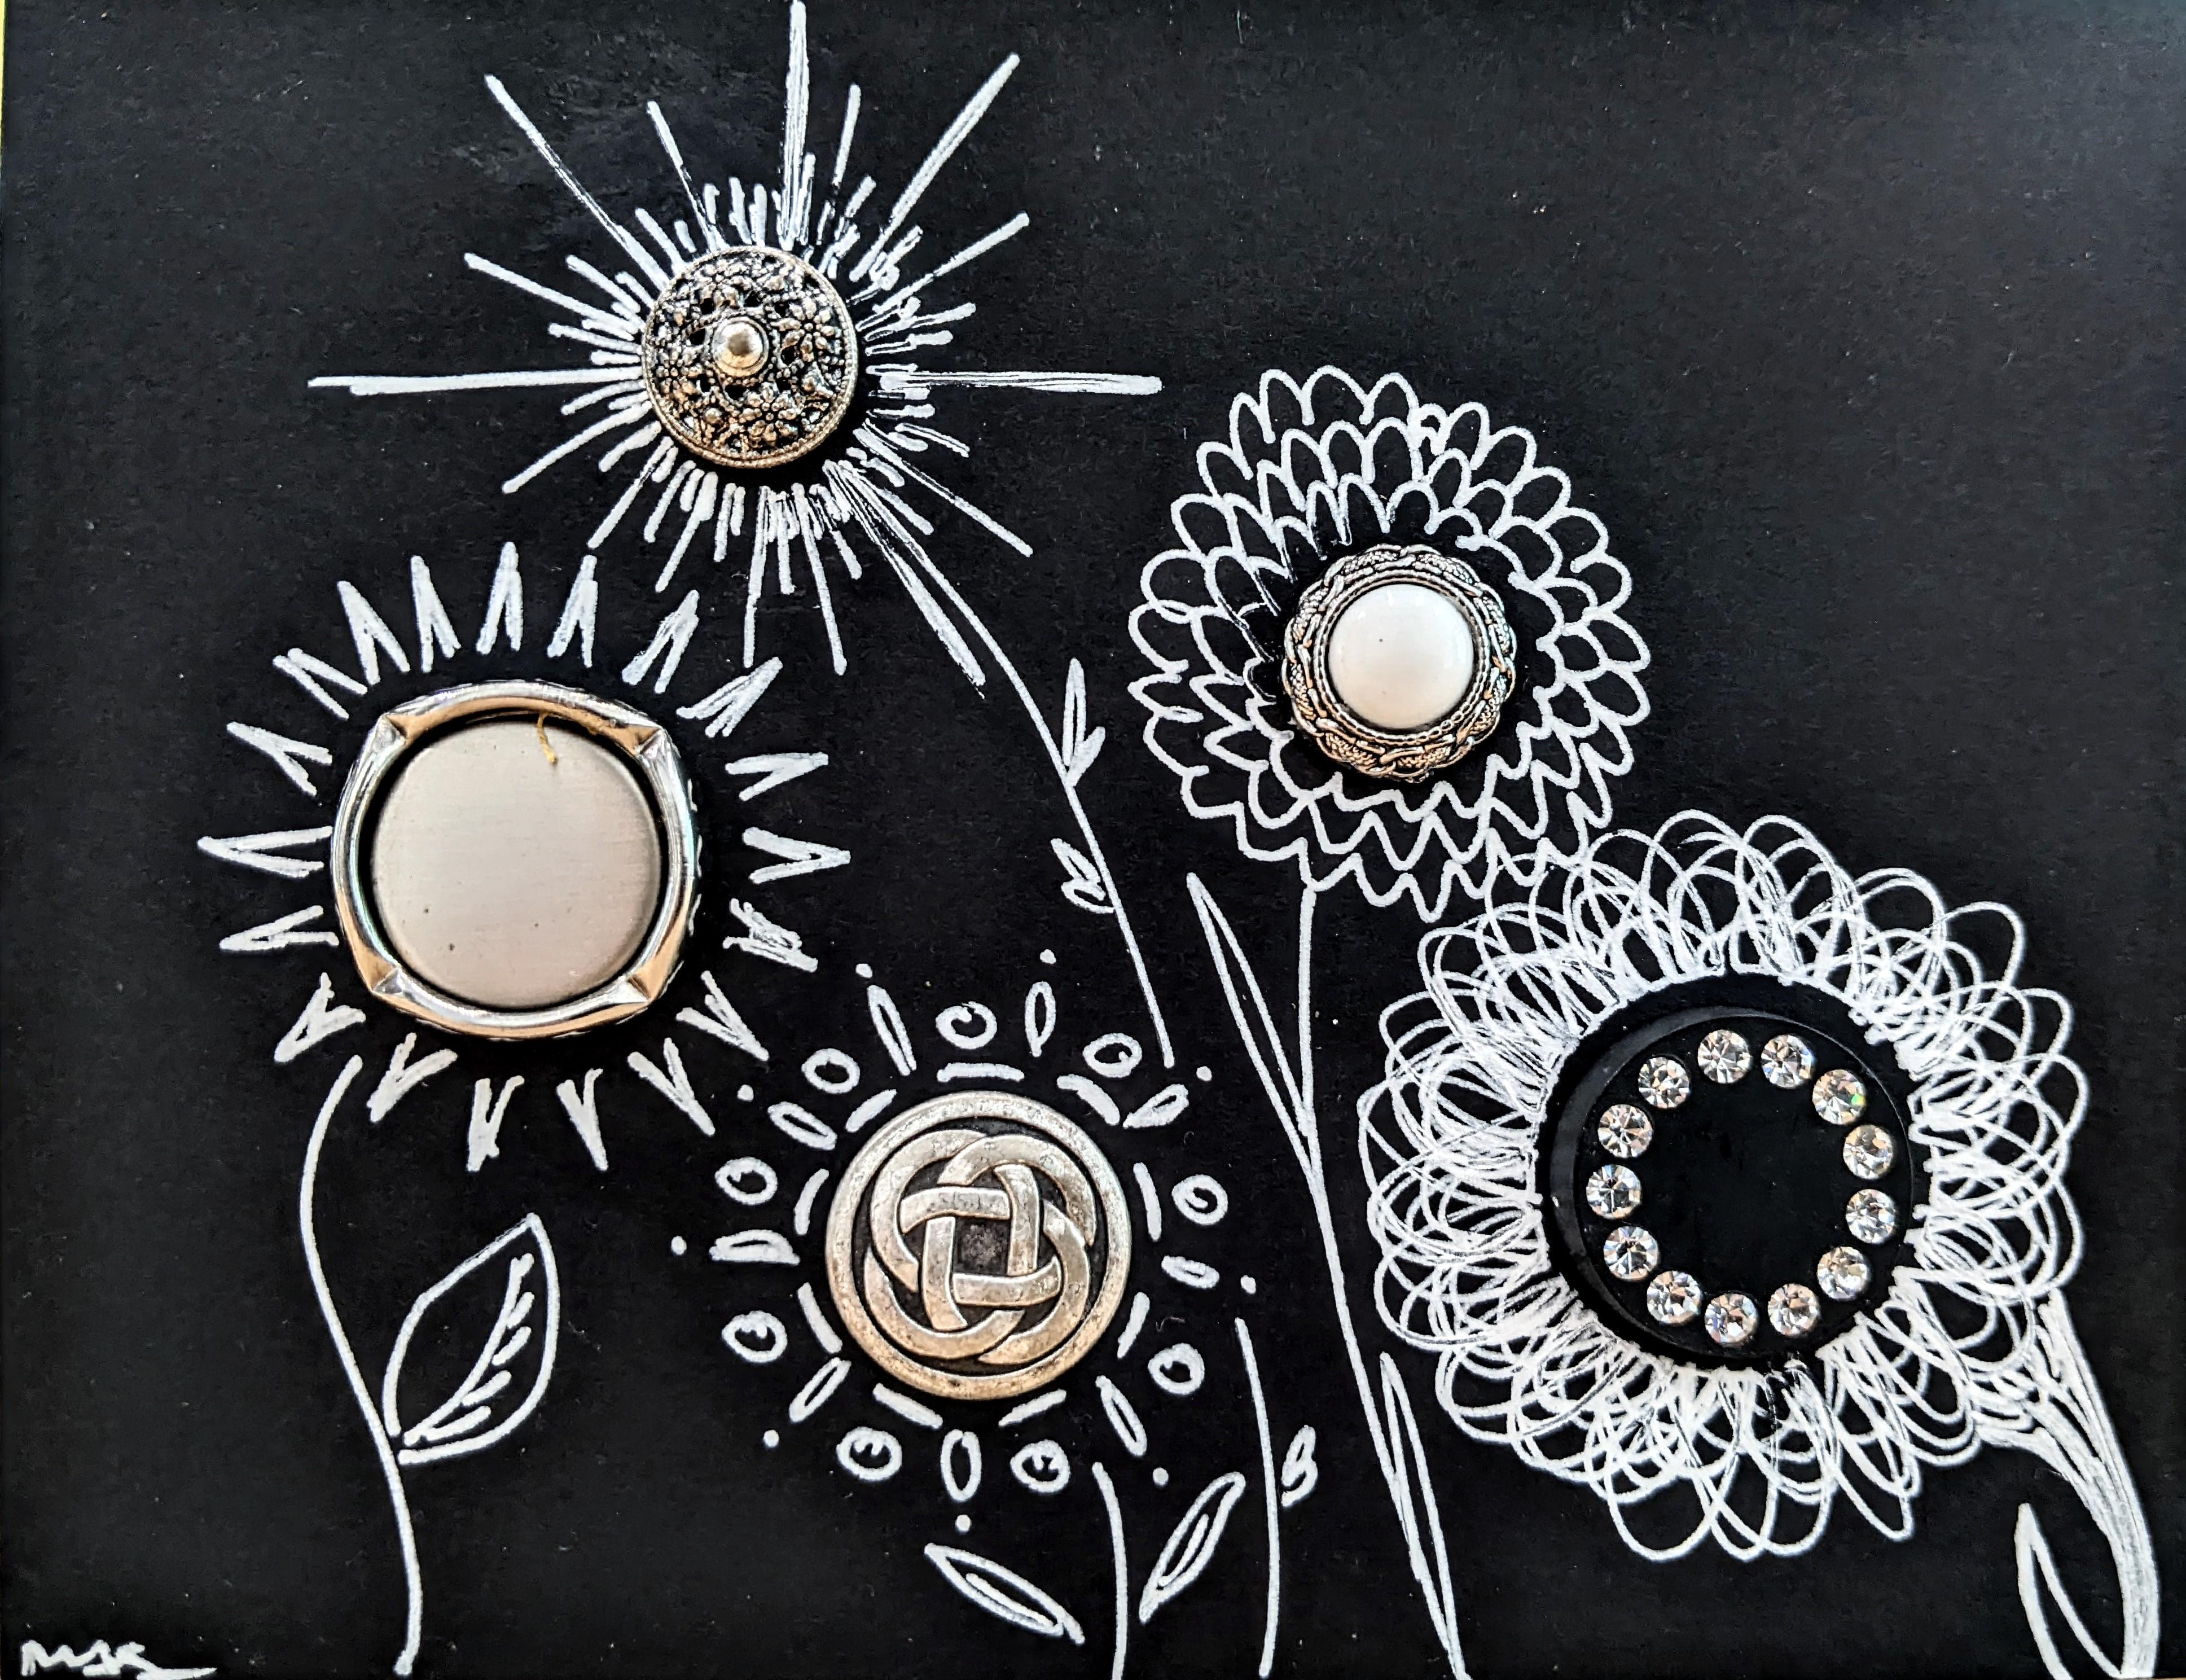 Silver buttons glued to a piece of black cardstock, with floral designs drawn in white pen around each button